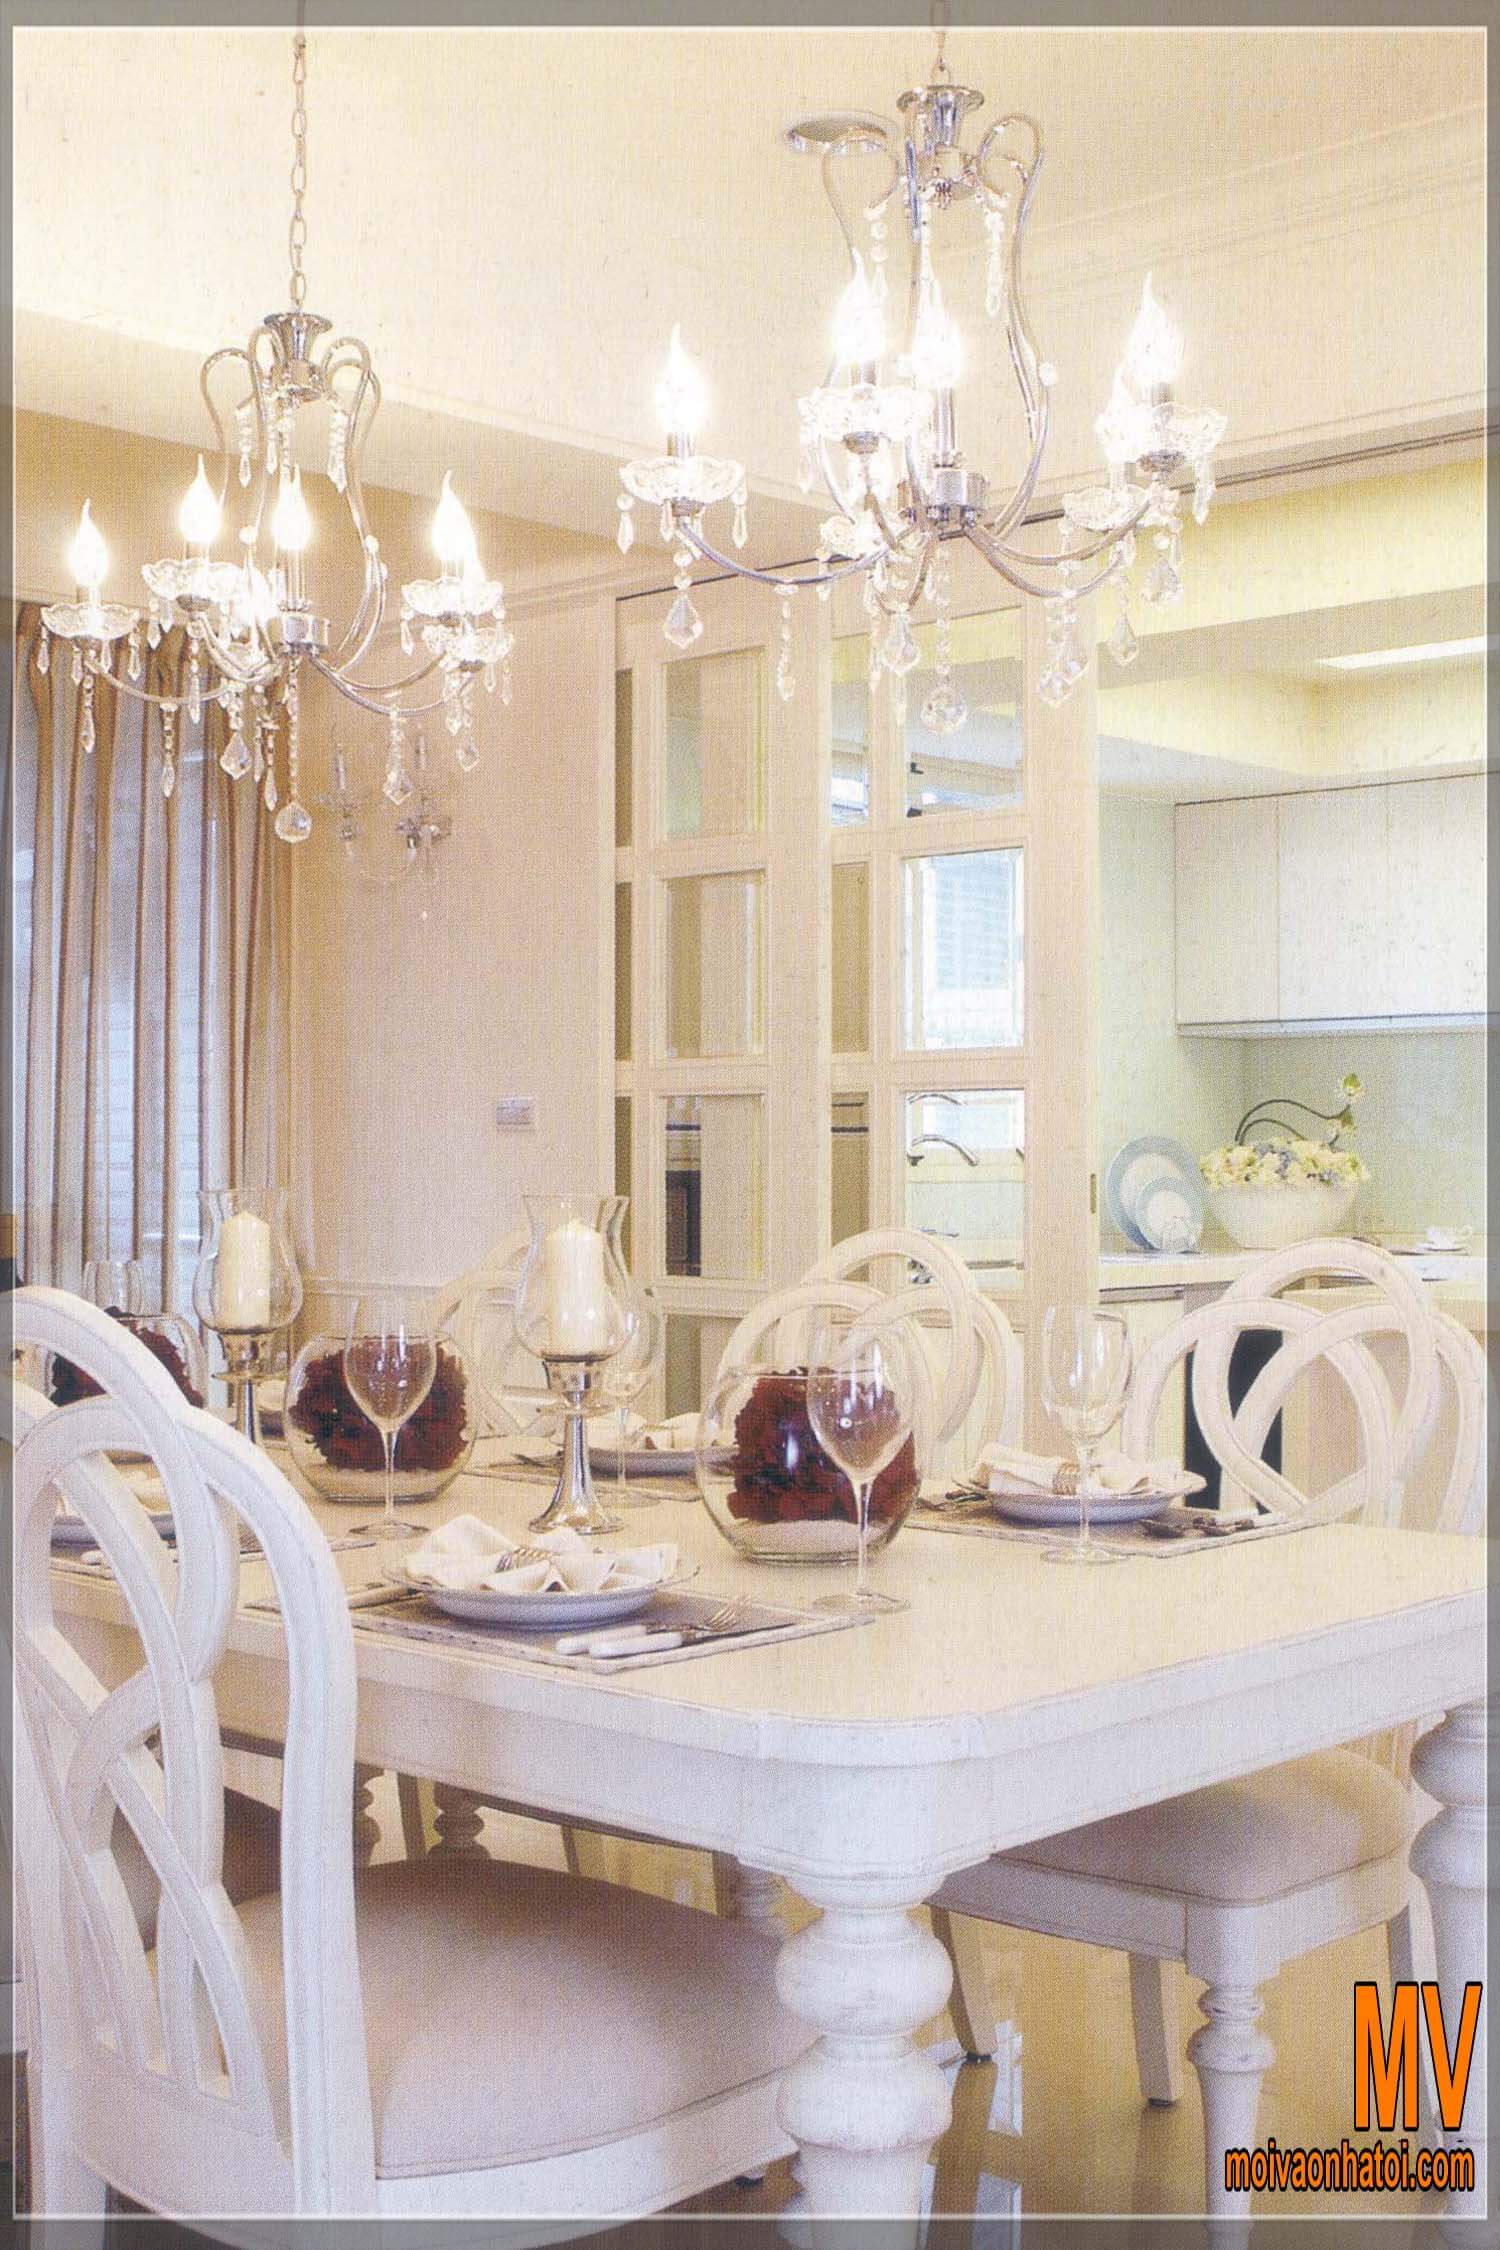 Sample beautiful dining table chandeliers